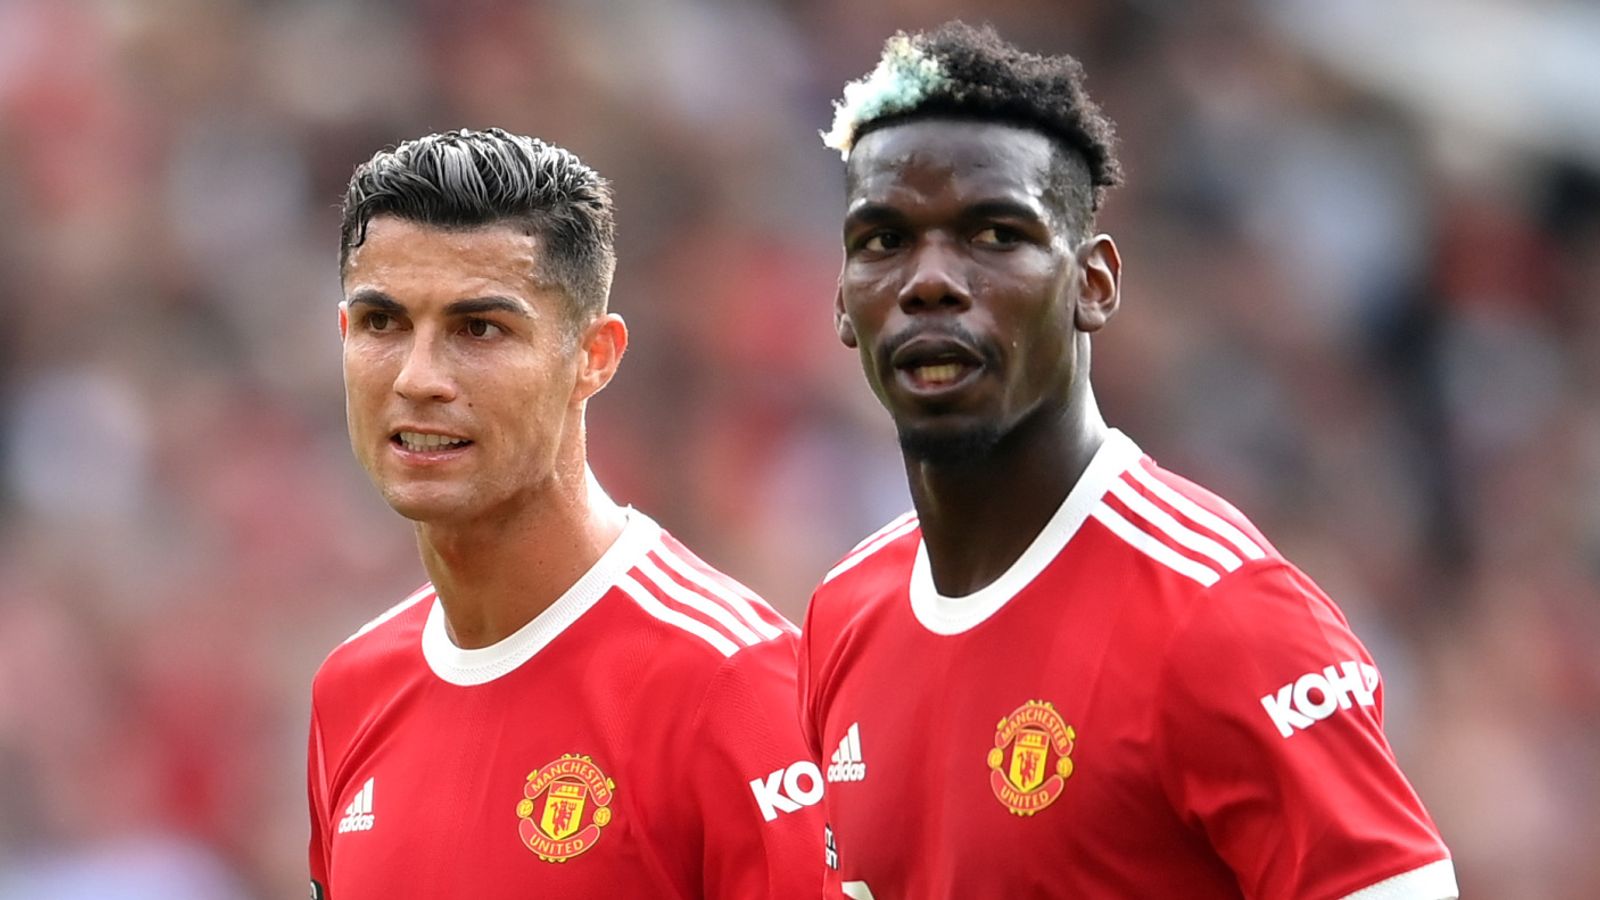 Paul Pogba: Manchester United midfielder more open to signing contract extension after impressive summer recruitment